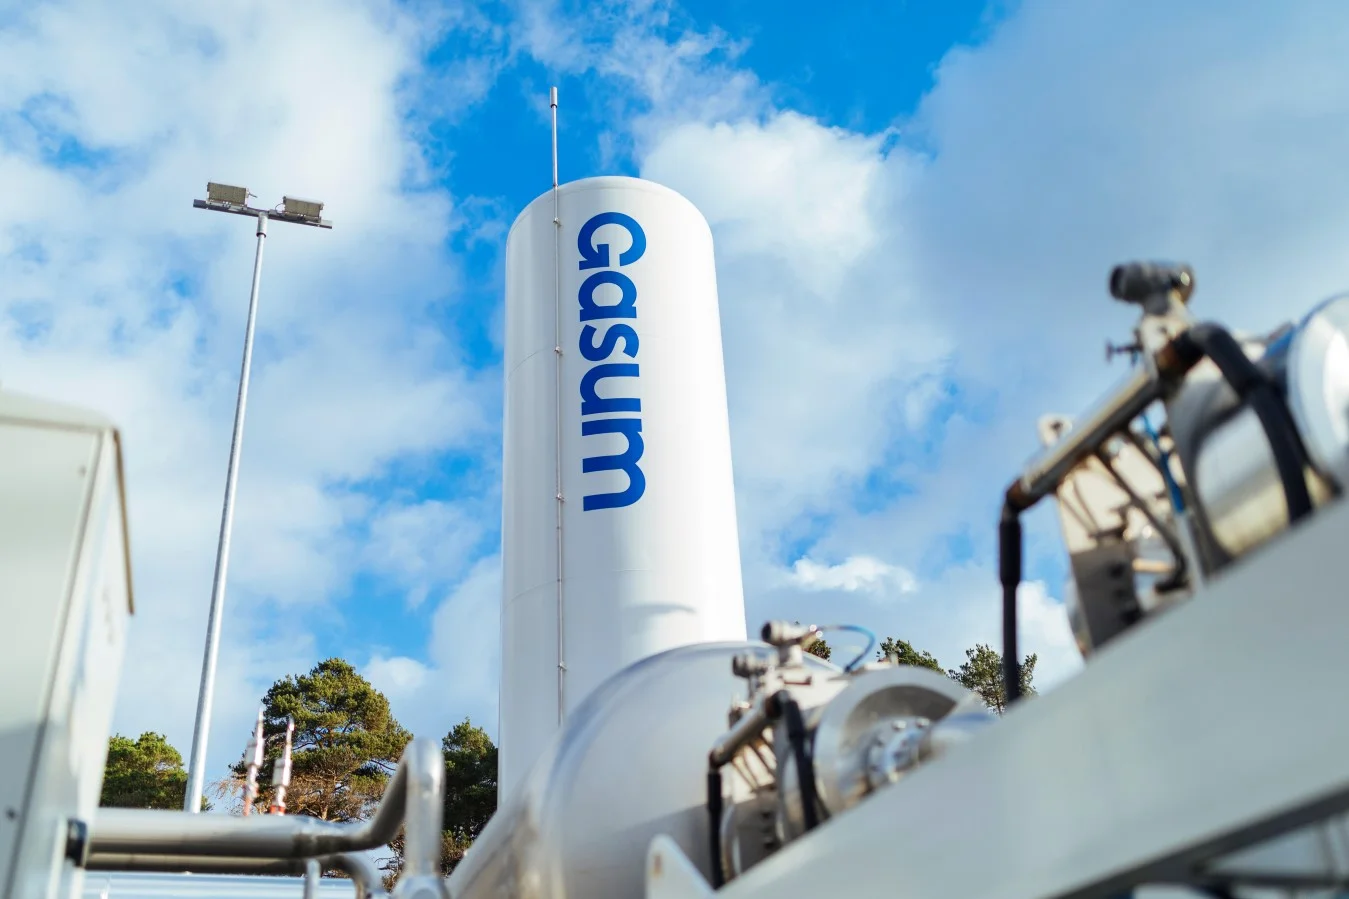 Gasum secures offtake agreement for e-methane production in Finland